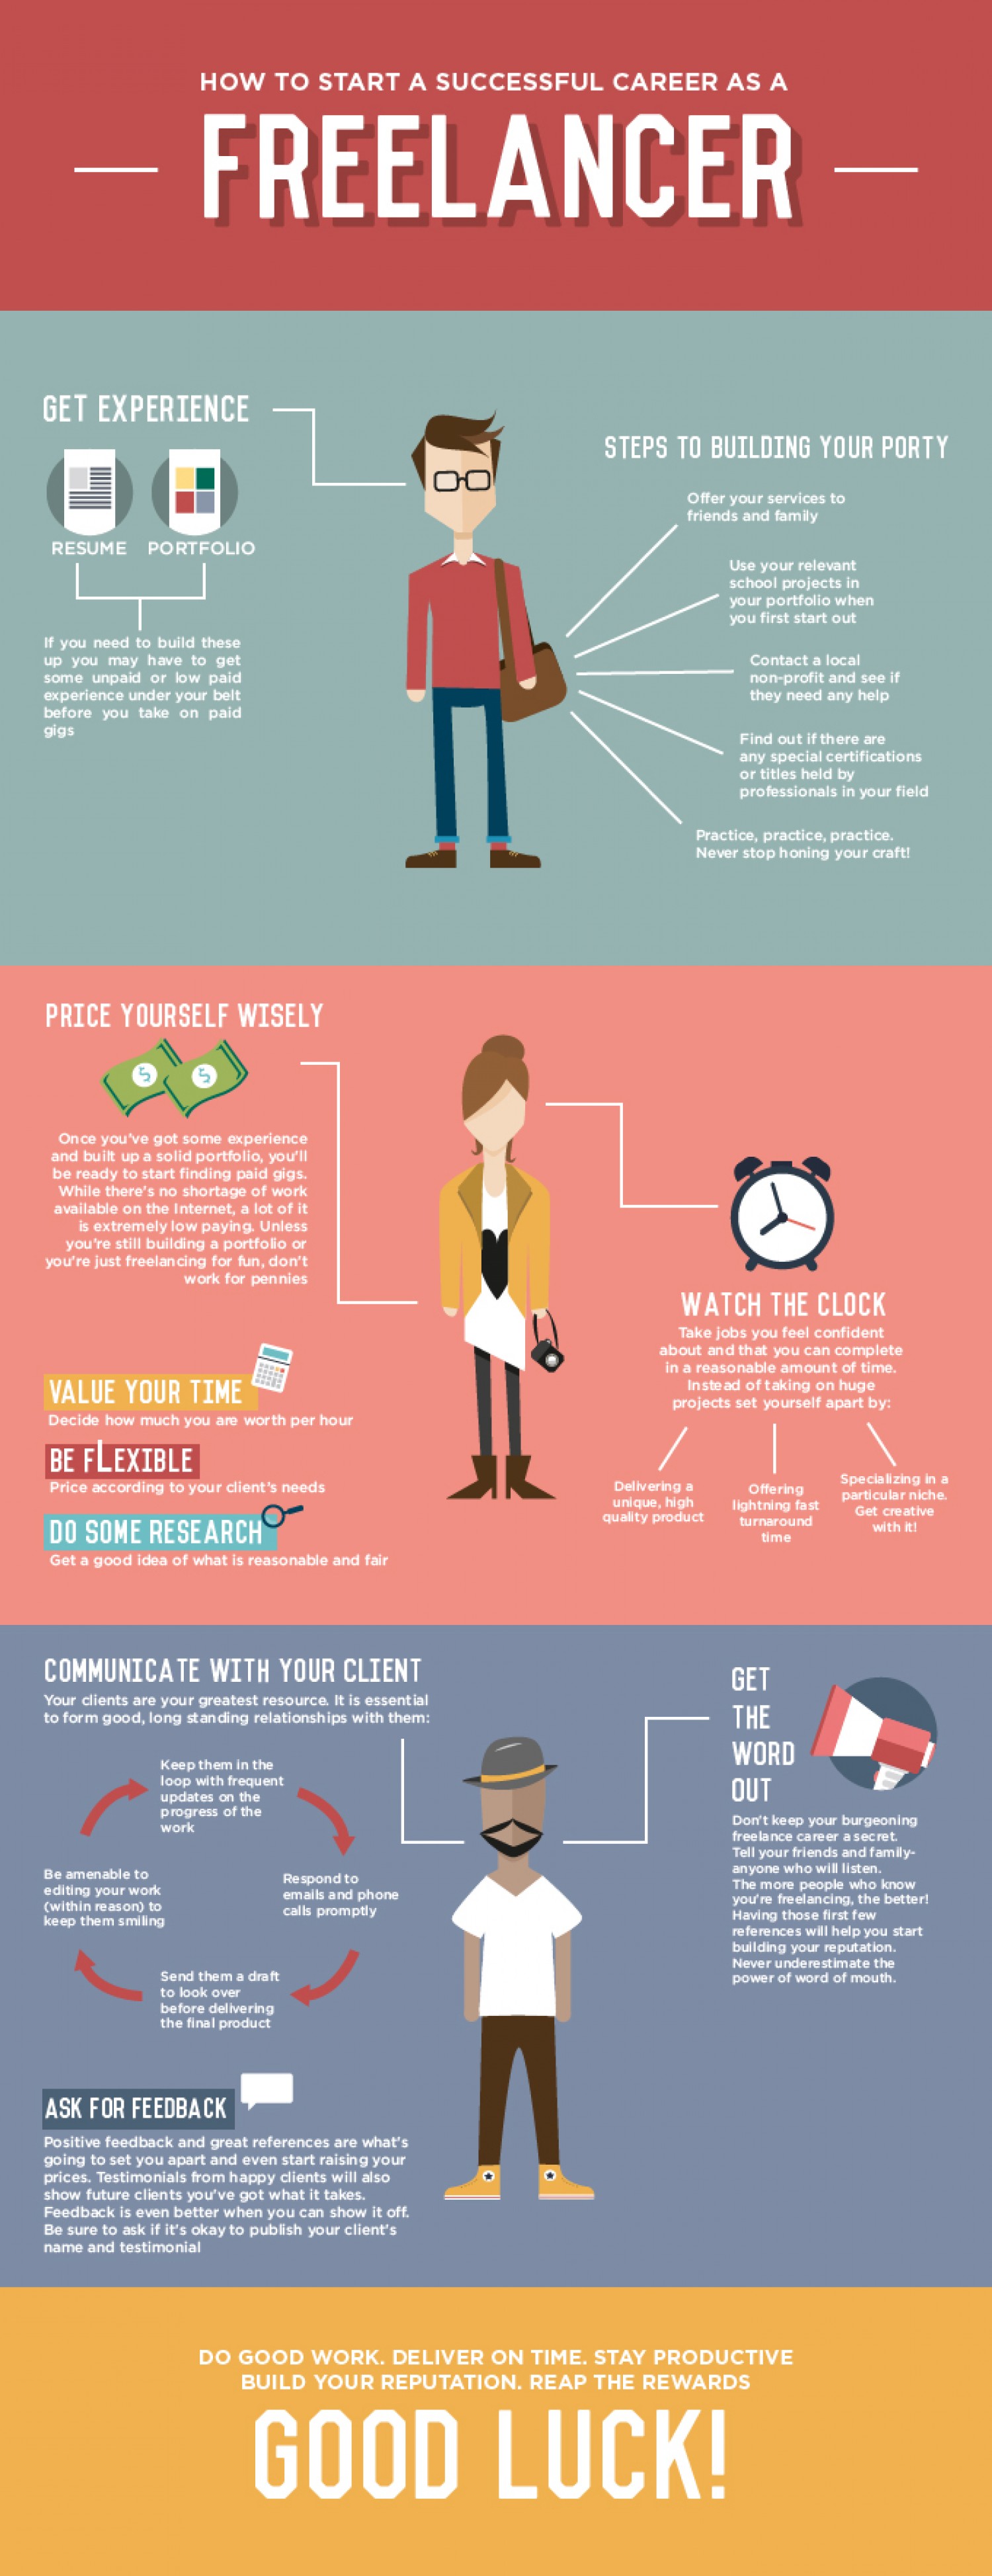 How to Start a Successful Career as a Freelancer1500 x 3895